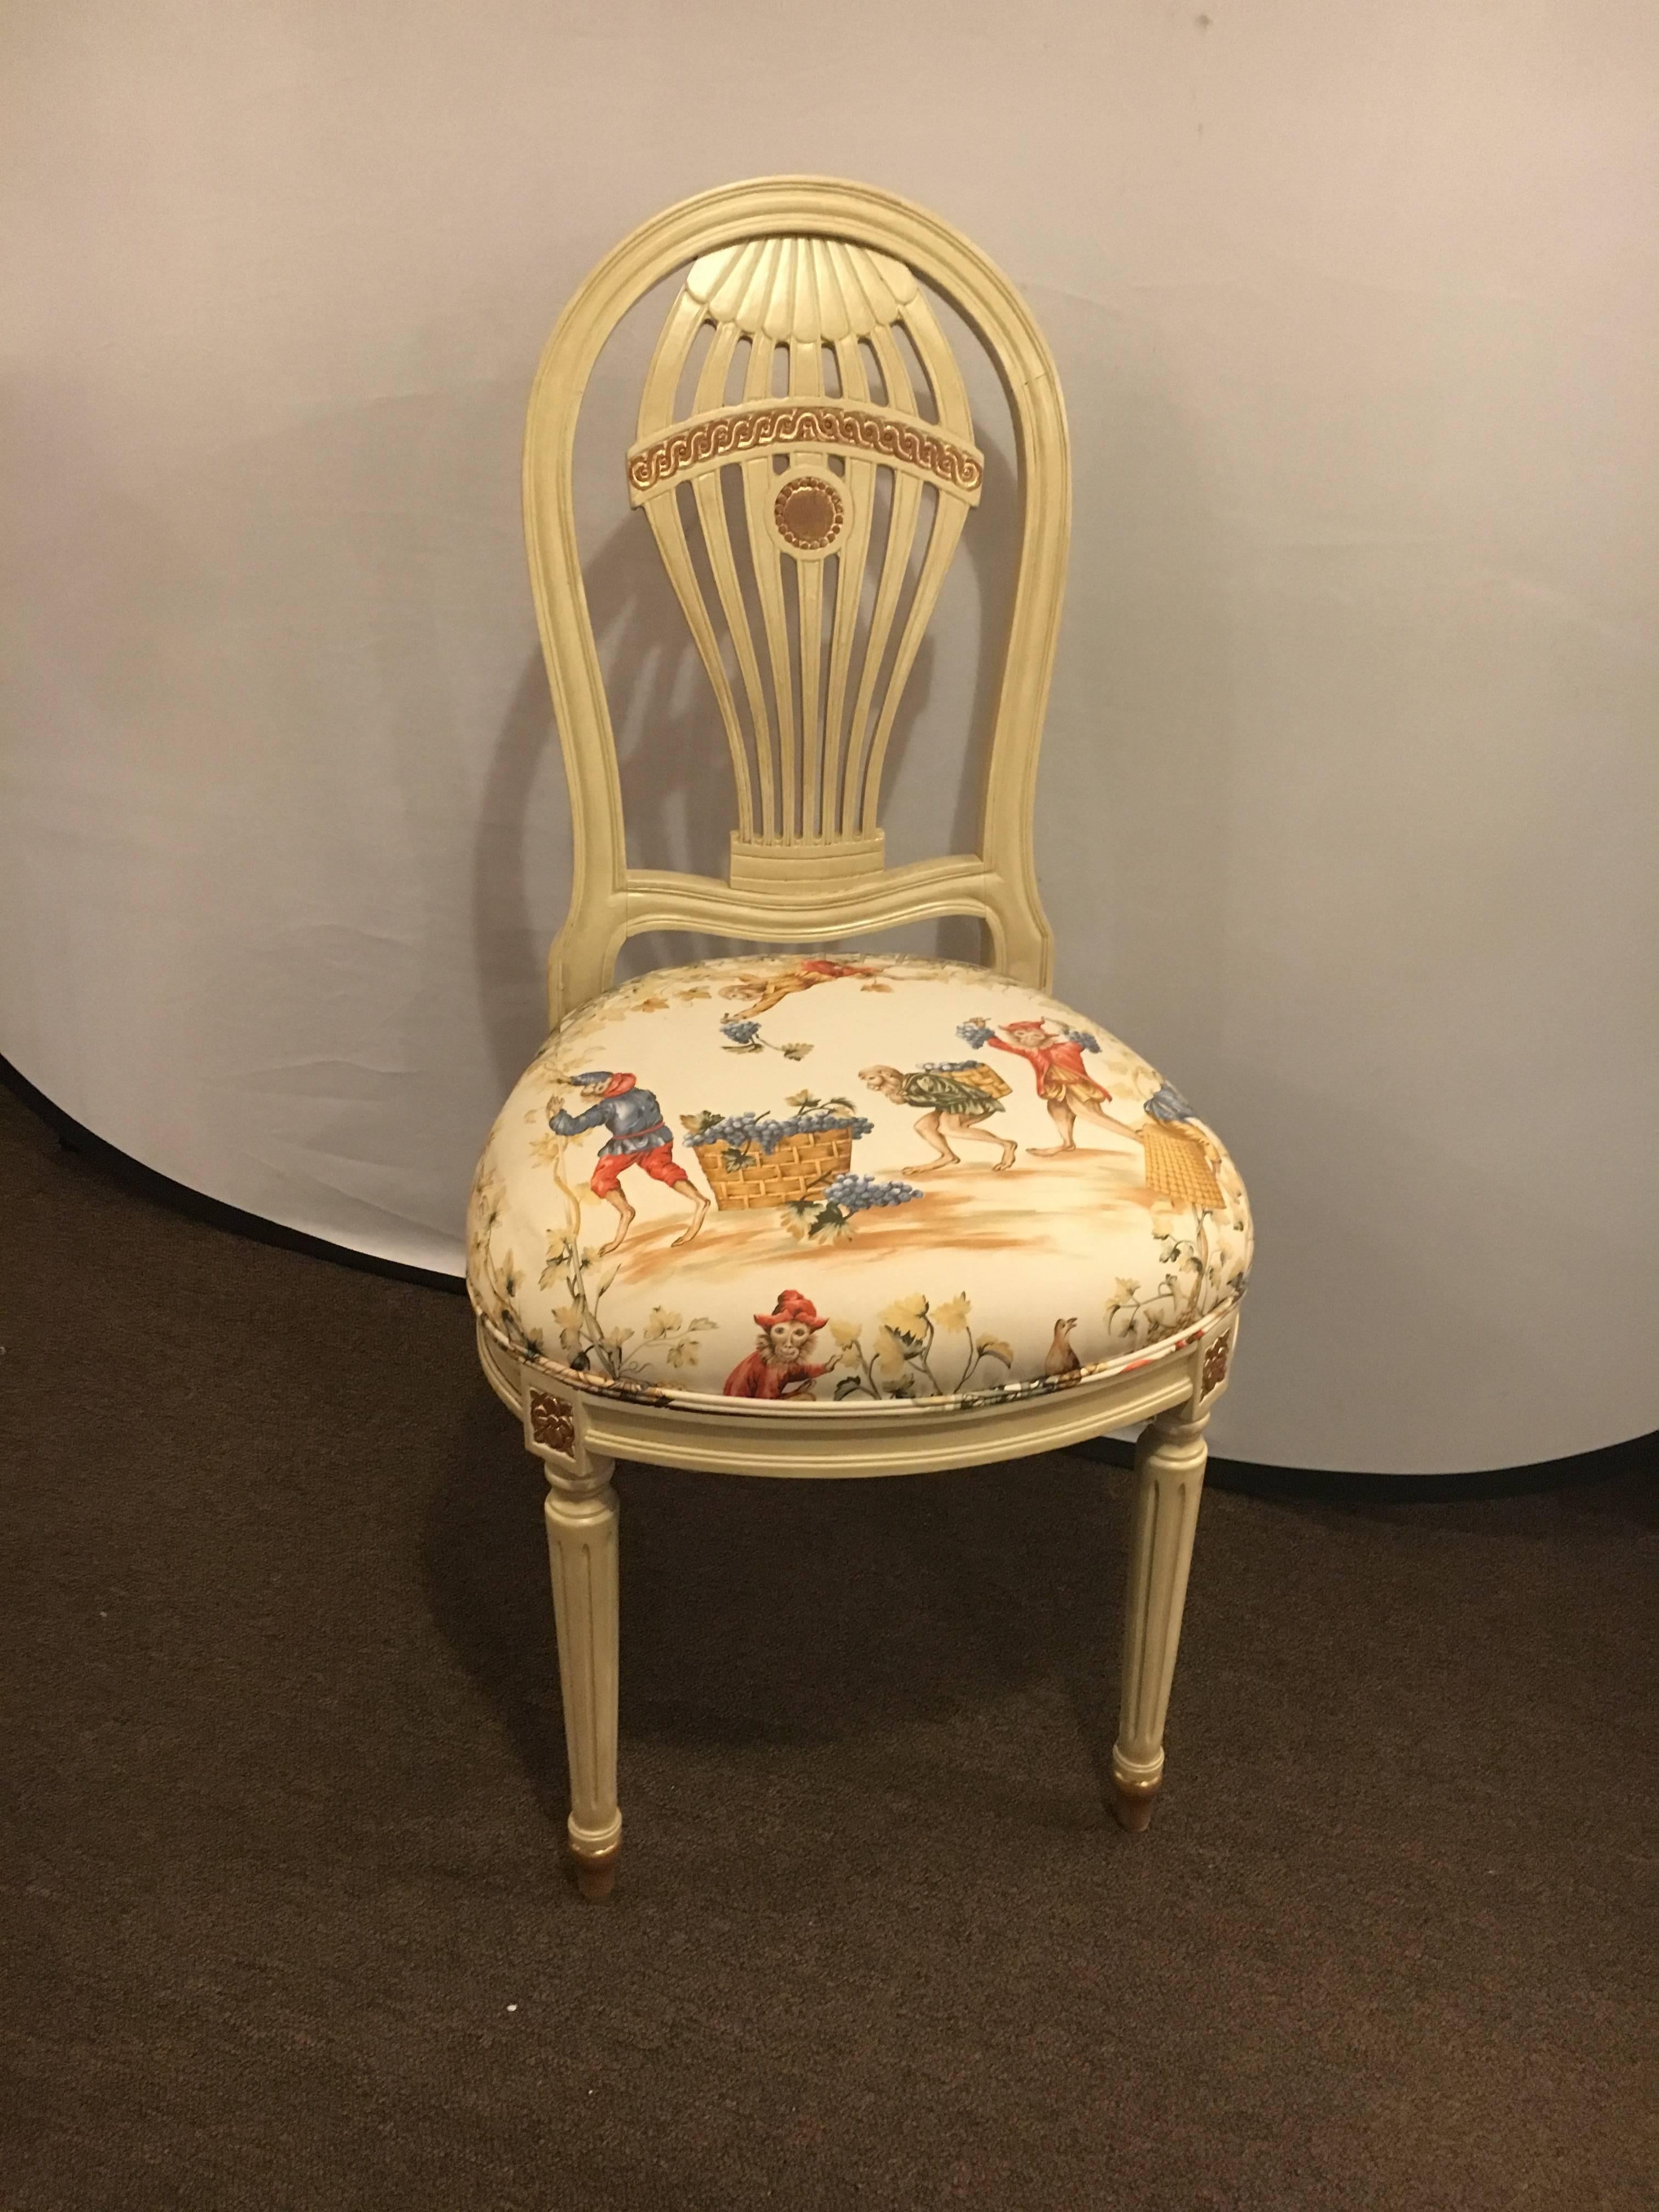 Set of 5 dining chairs by Maison Jansen. This fine set of paint decorated dining chairs bring new meaning to the Hollywood Regency Era. Having been recently paint decorated with gilt hi lights this set ebonies the style and influence which once